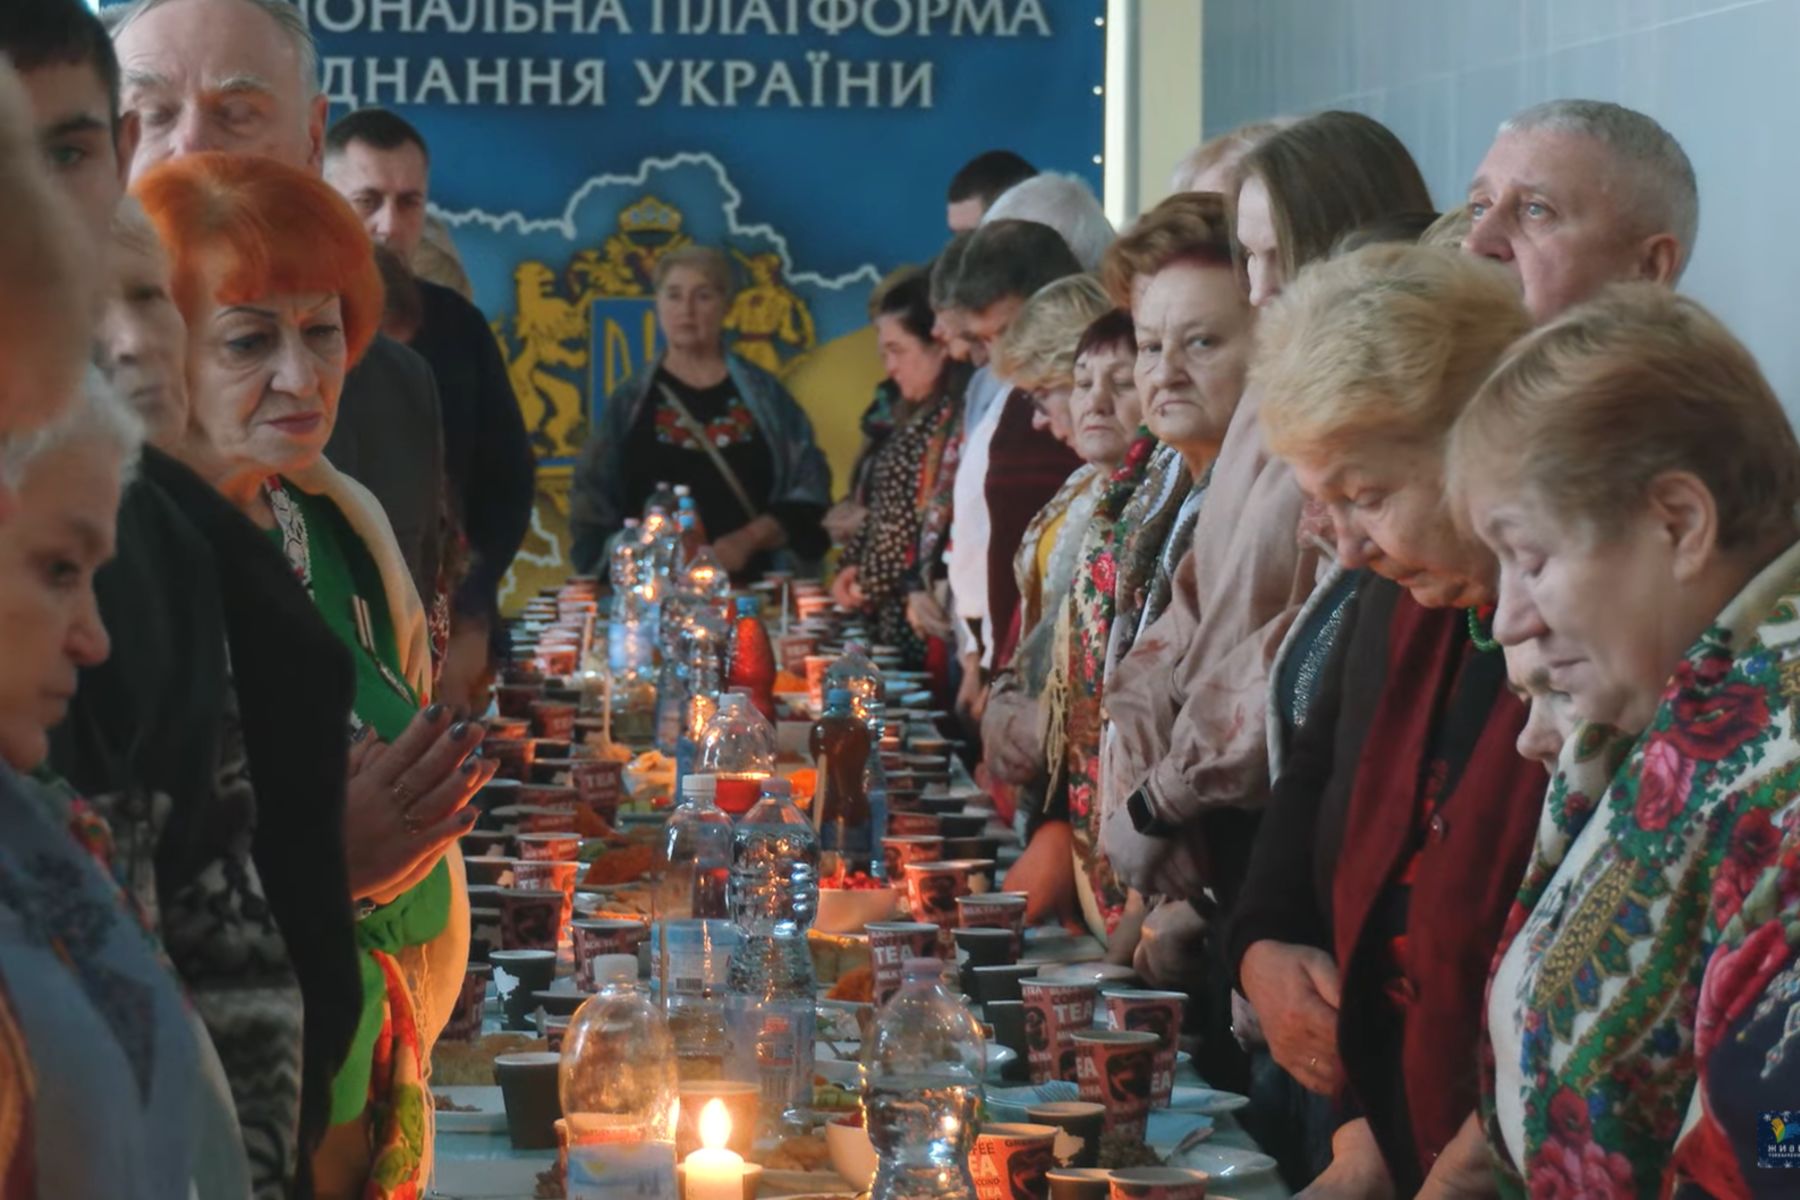 Charity Event “Holy Supper” for Families of Fallen Defenders of Ukraine Hosted in Fastiv